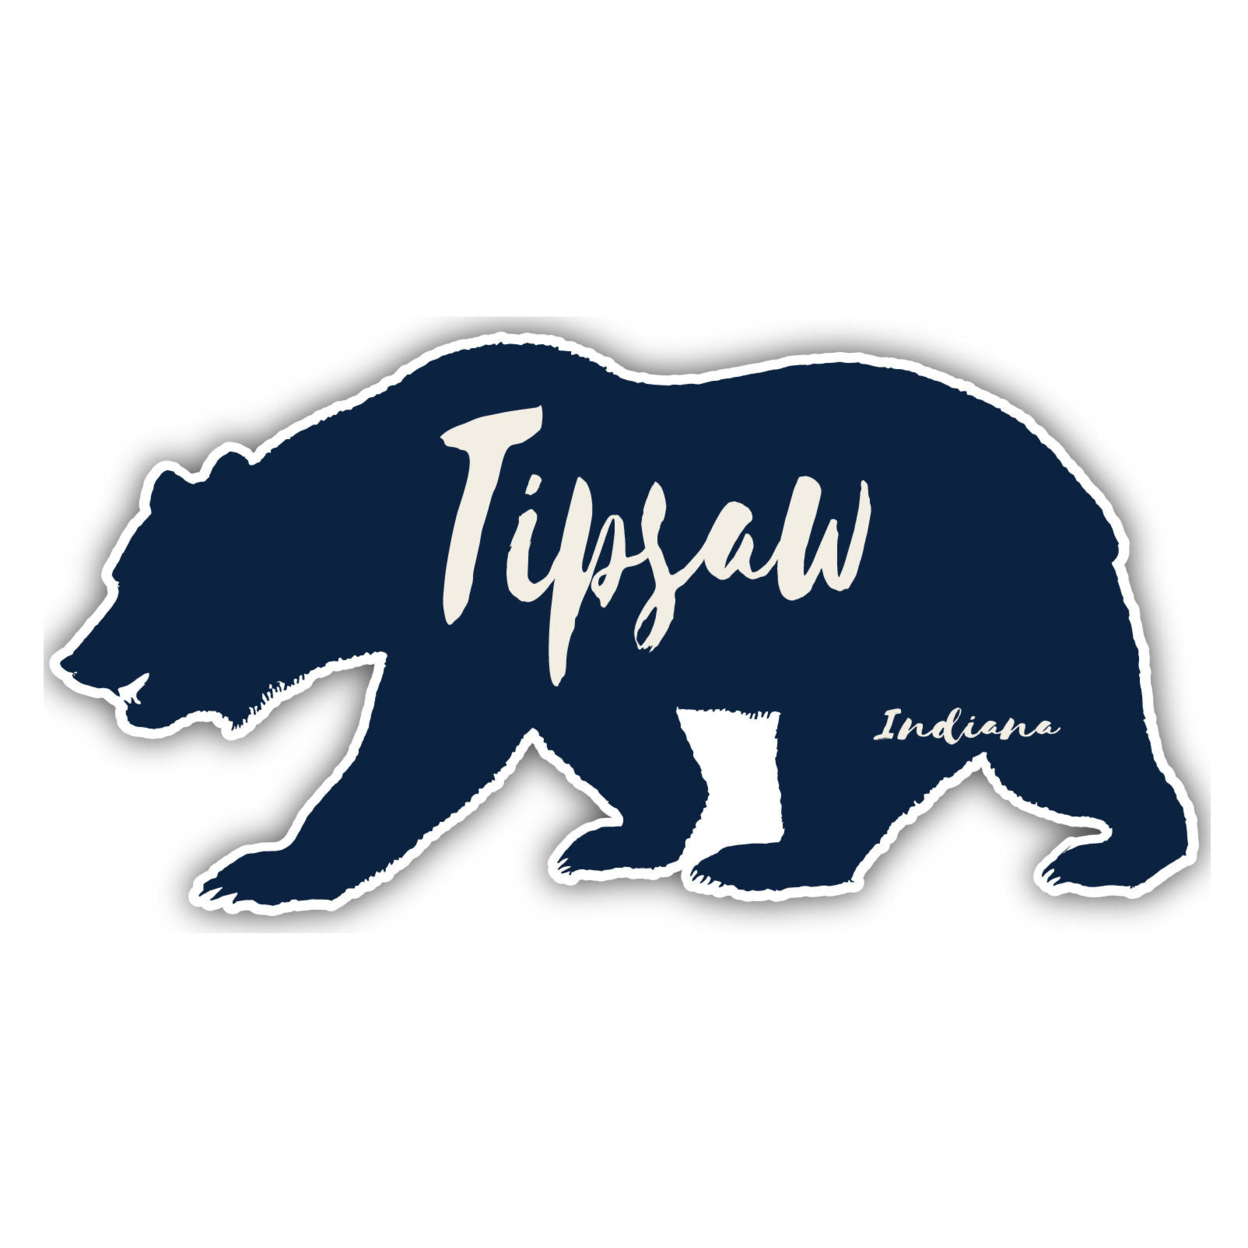 Tipsaw Indiana Souvenir Decorative Stickers (Choose Theme And Size) - Single Unit, 4-Inch, Bear